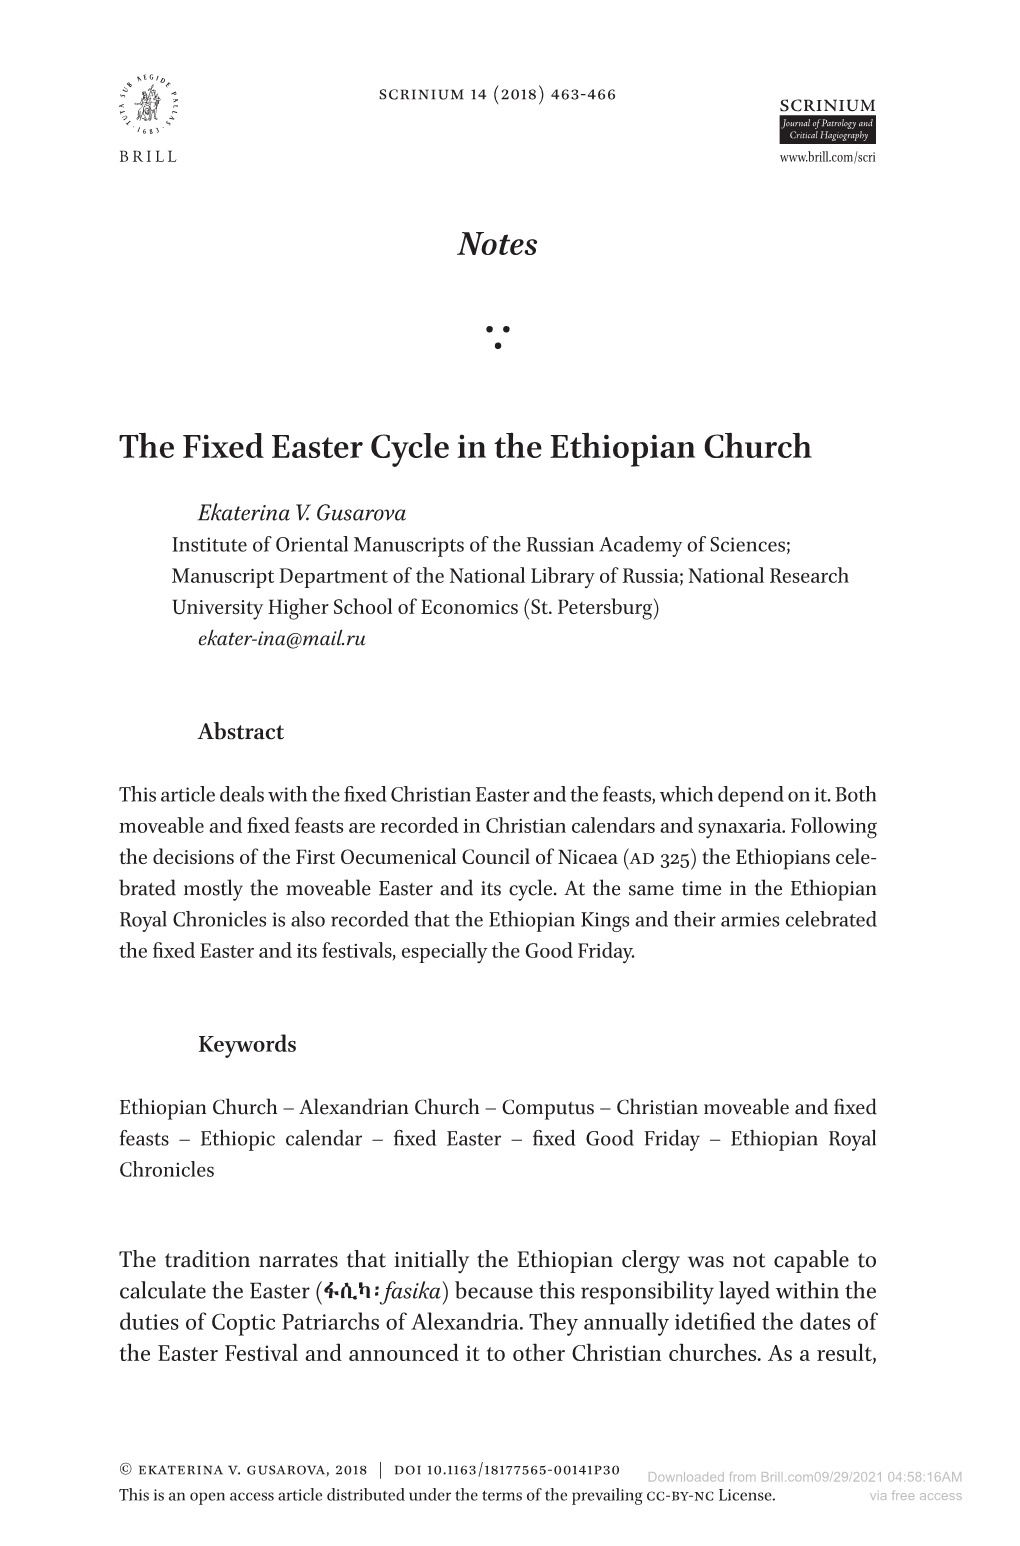 Notes the Fixed Easter Cycle in the Ethiopian Church